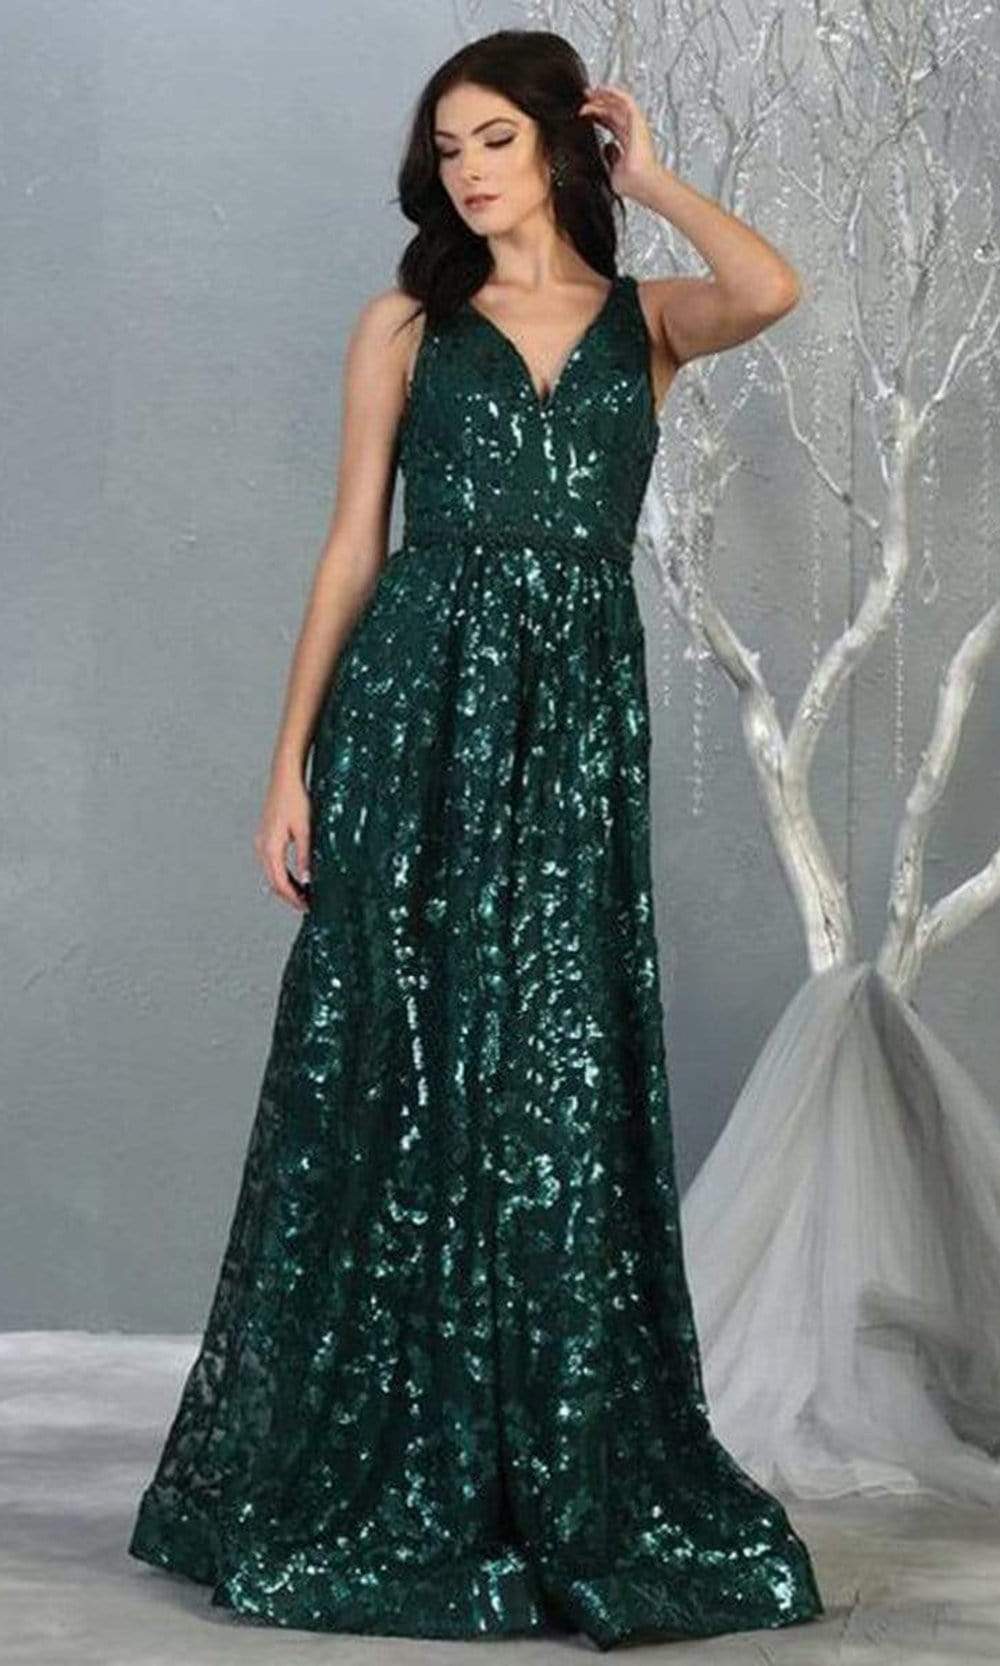 May Queen - RQ7866 Embellished V-neck A-line Gown Evening Dresses 4 / Hunter-Grn